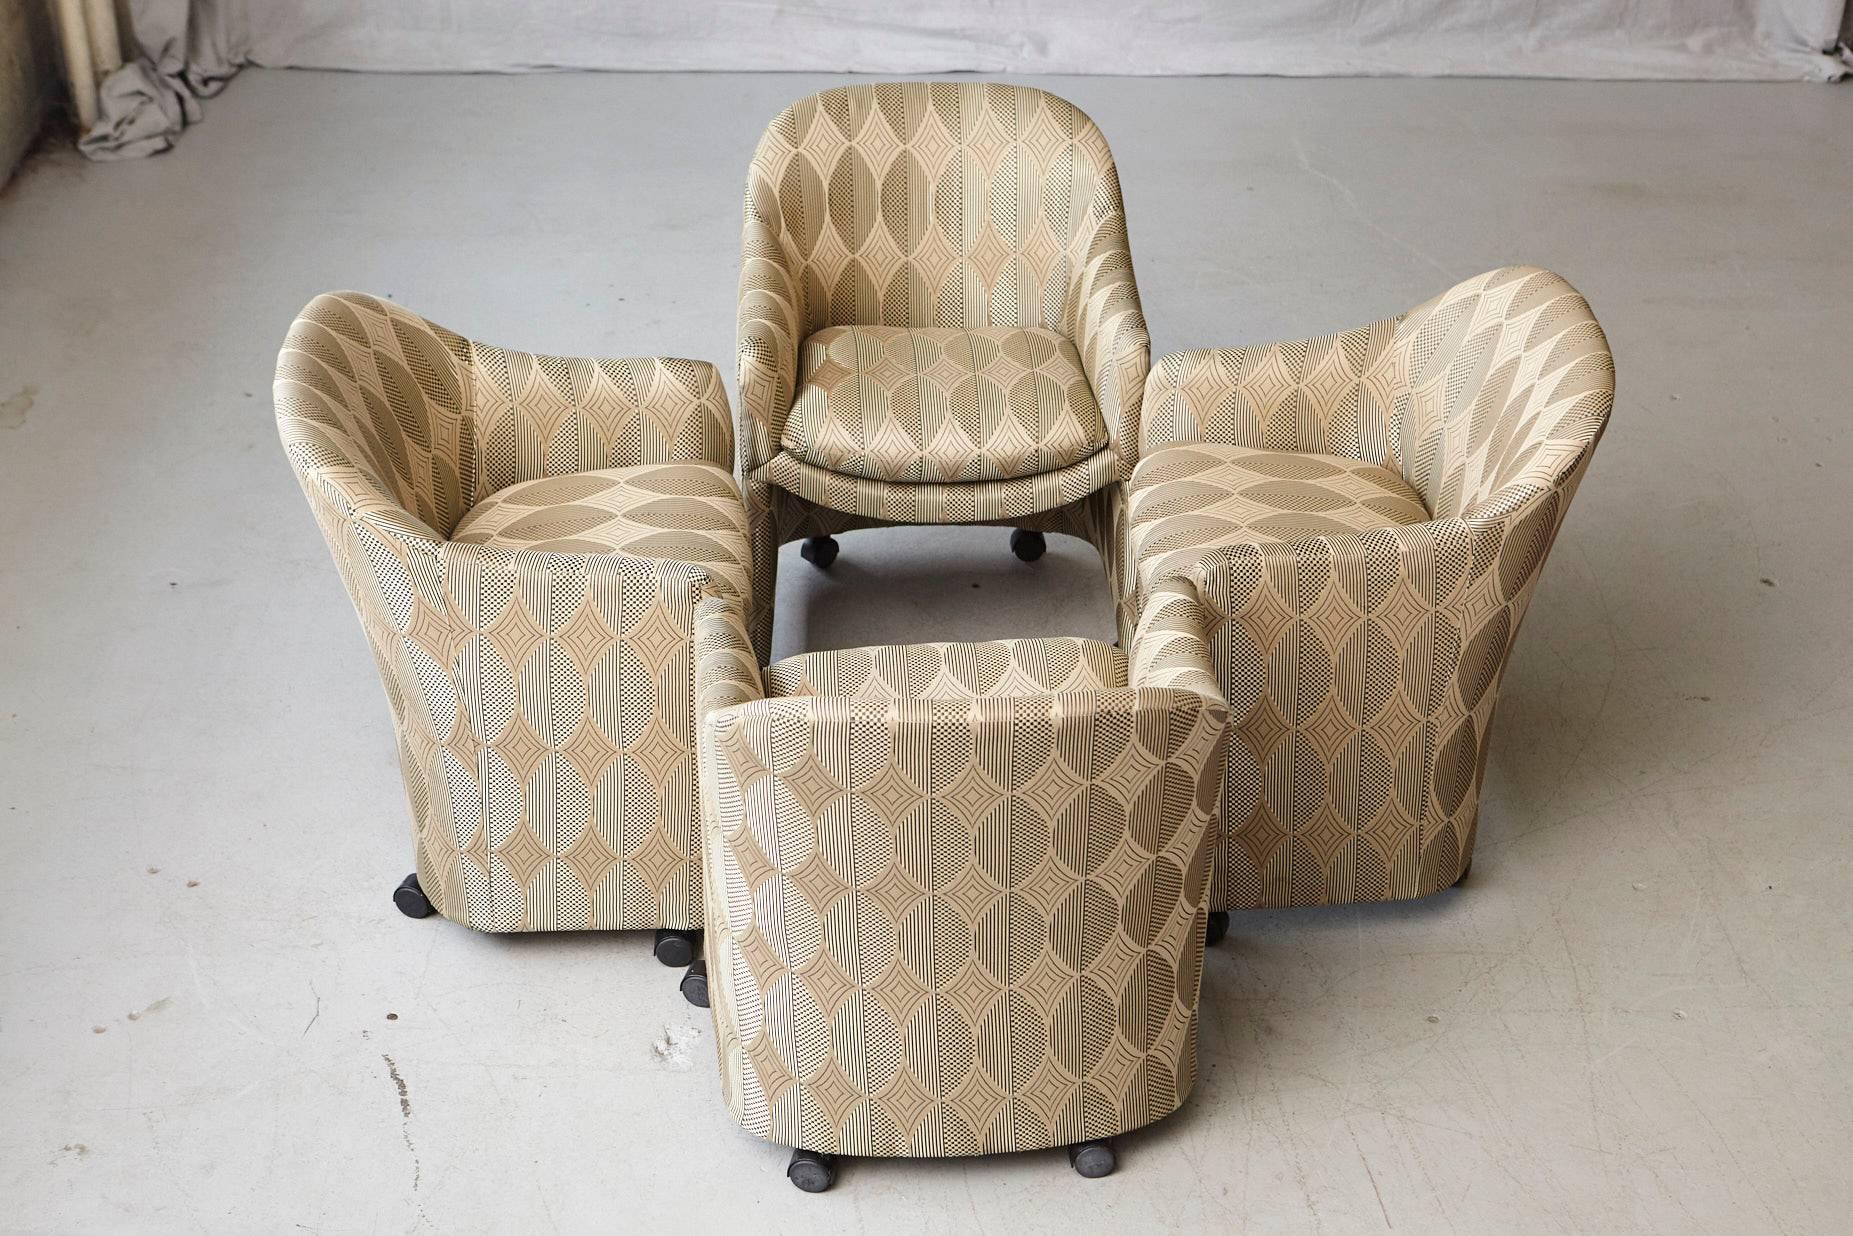 Lovely set of four Milo Baughman barrel dining armchairs on casters with a graphic upholstery pattern for Thayer Coggin.